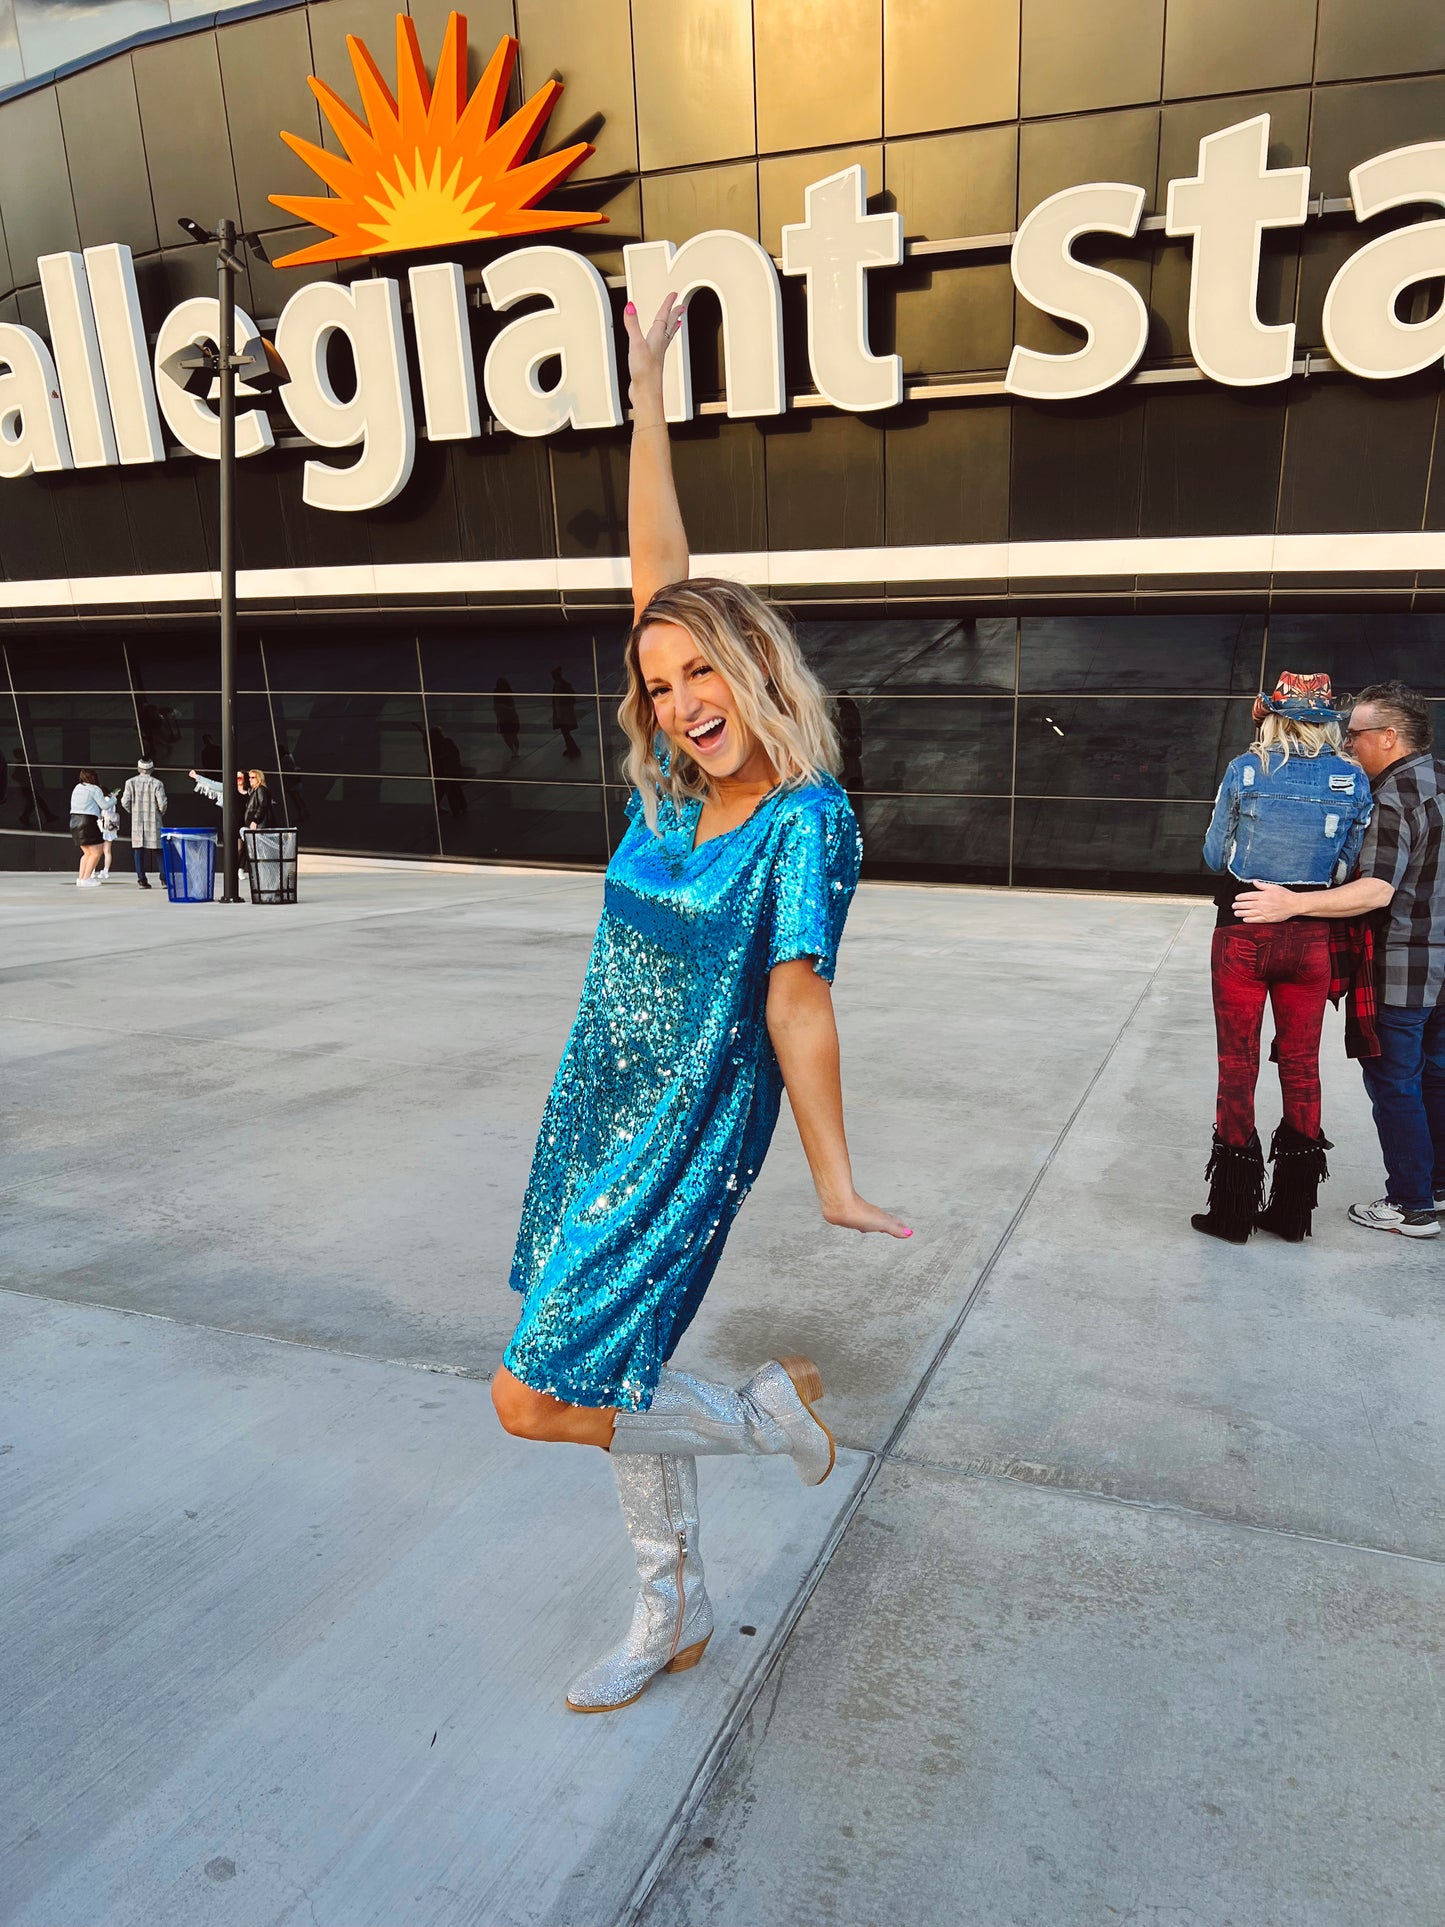 THE TAYLOR MIDNIGHT ERA SEQUIN DRESS IN TEAL BY PINK DESERT